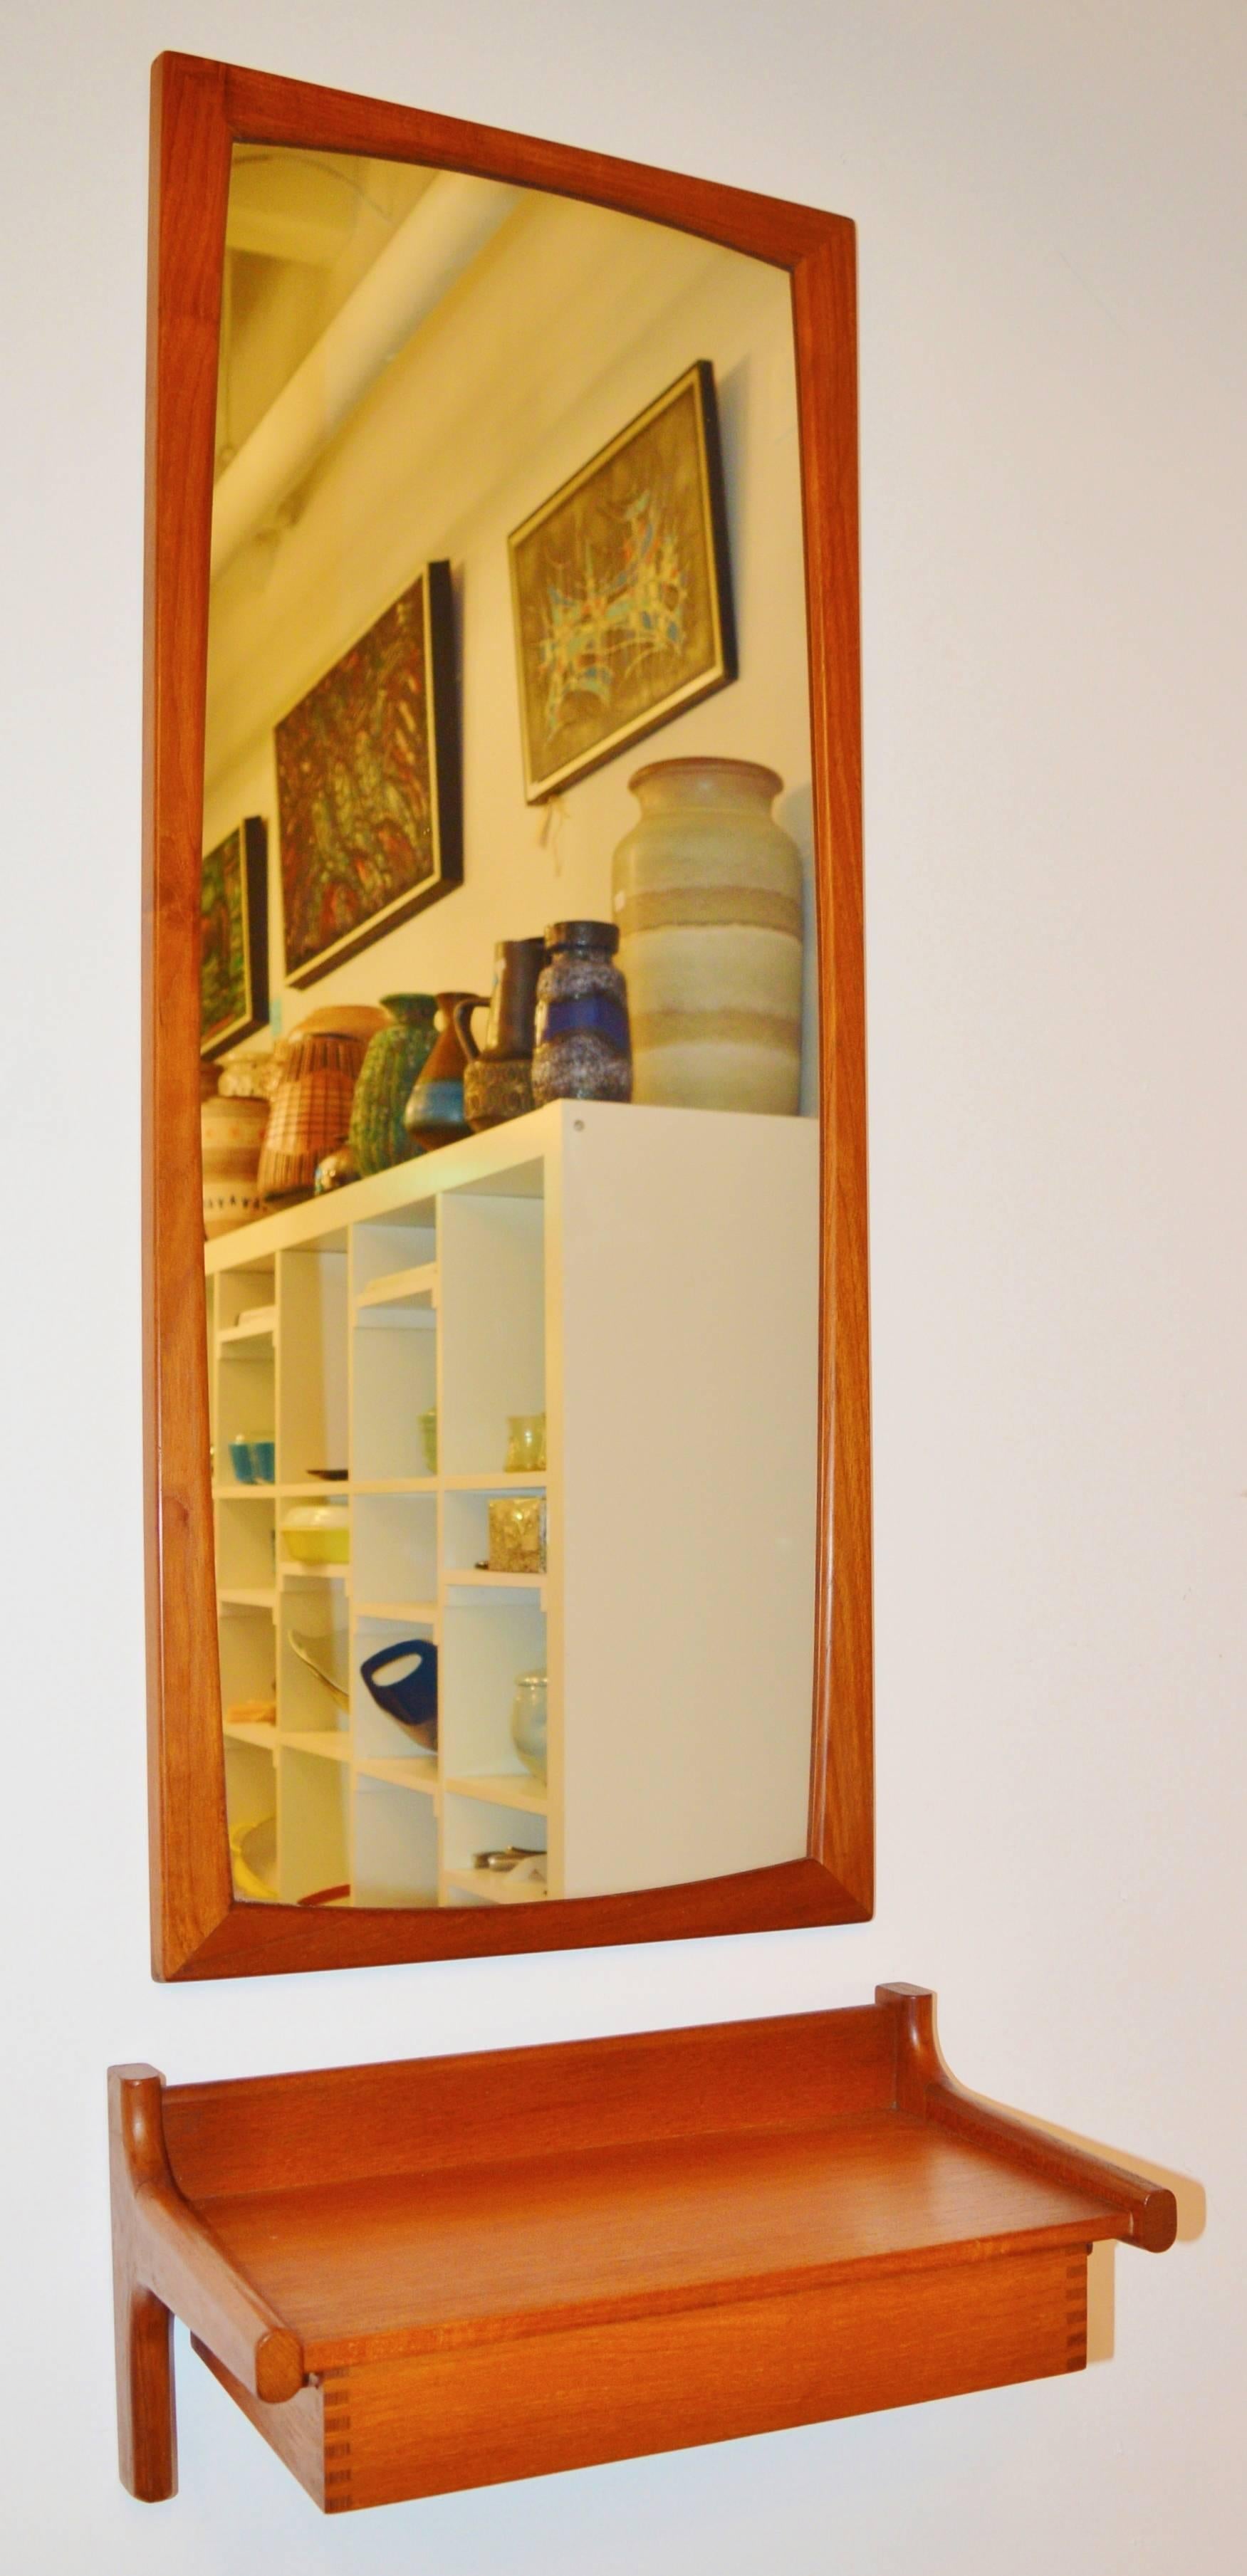 This is a lovely quality pairing of a Classic teak entry mirror to check yourself on the way out the door and a shelf with a drawer for your mail or keys. The mirror was designed by Aksel Kjersgaard and has gorgeous rounded corners and is strung to